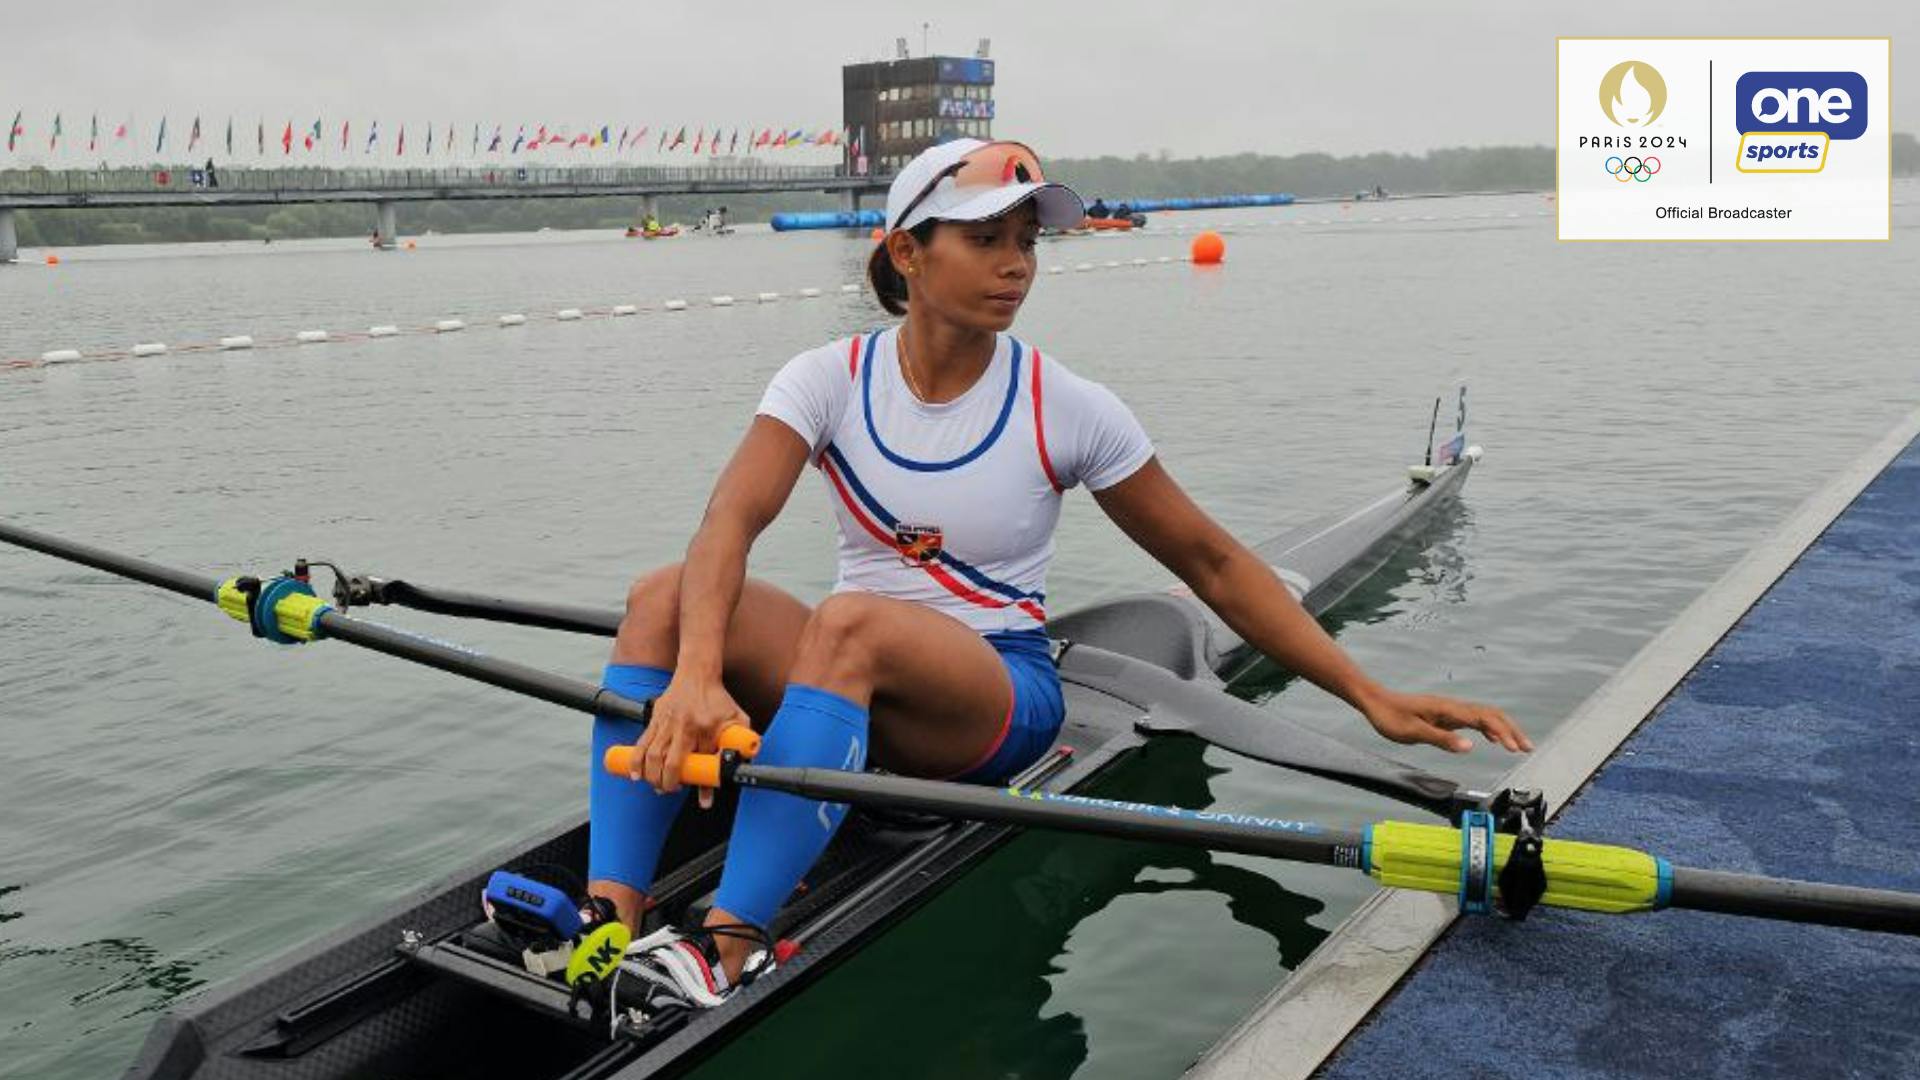 "Starstruck" Joanie Delgaco shifts focus to repechage after tough rowing debut in Paris 2024